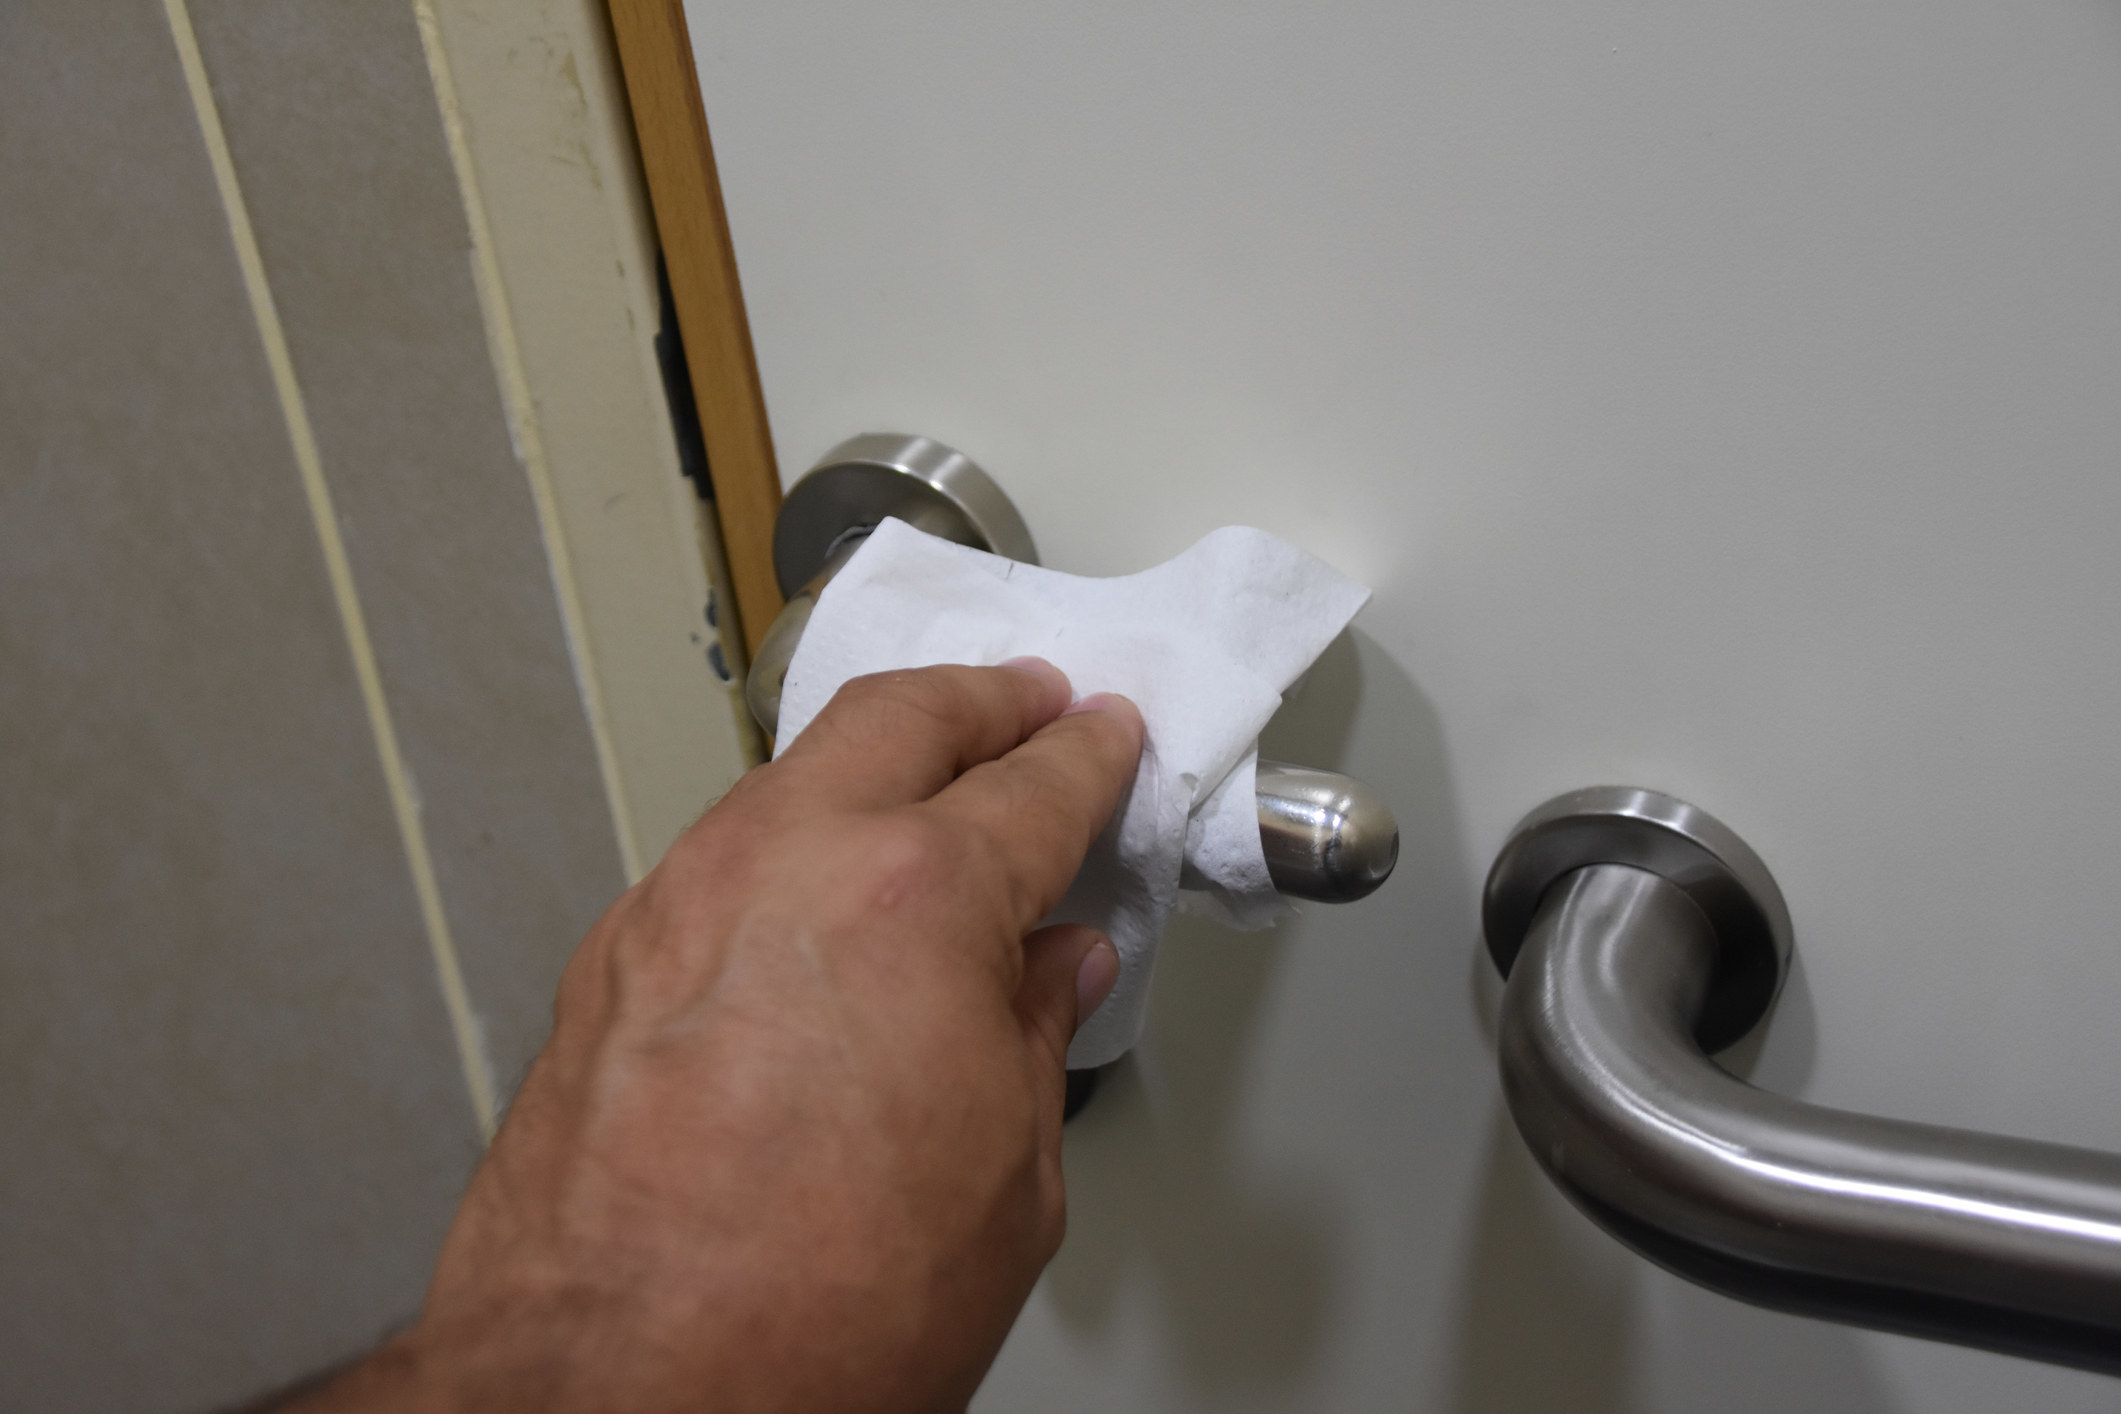 A hand touching a doorknob with a paper towel in hand